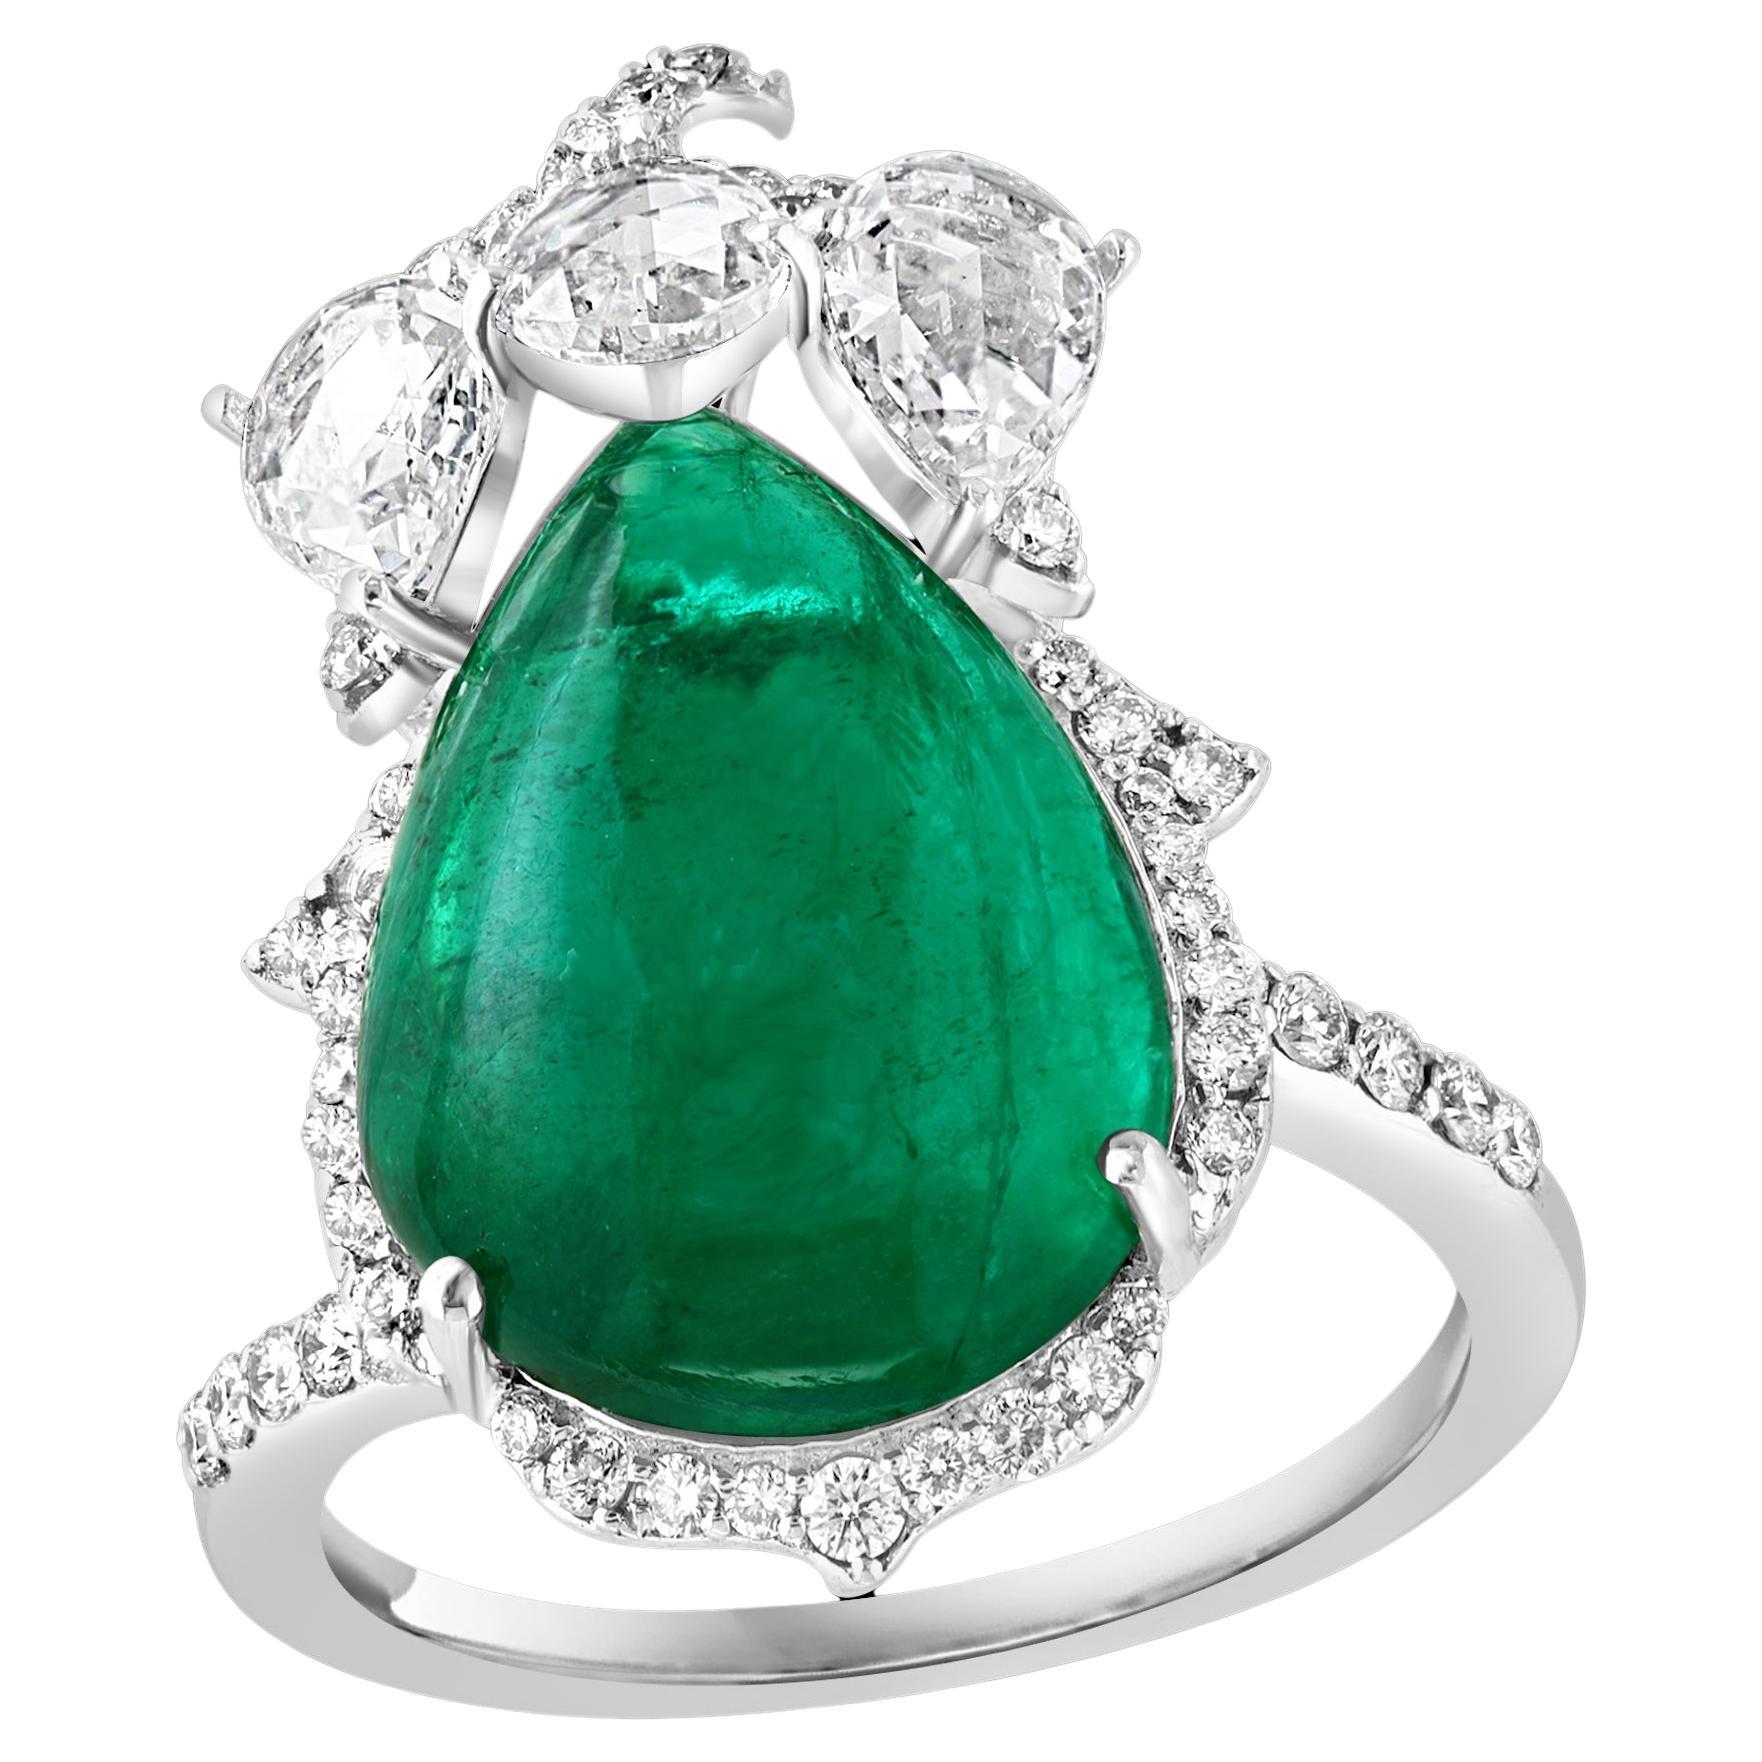 9 Ct Finest Zambian Sugar Loaf Emerald & 2 Ct Rose Cut Diamond Ring Size 7 For Sale